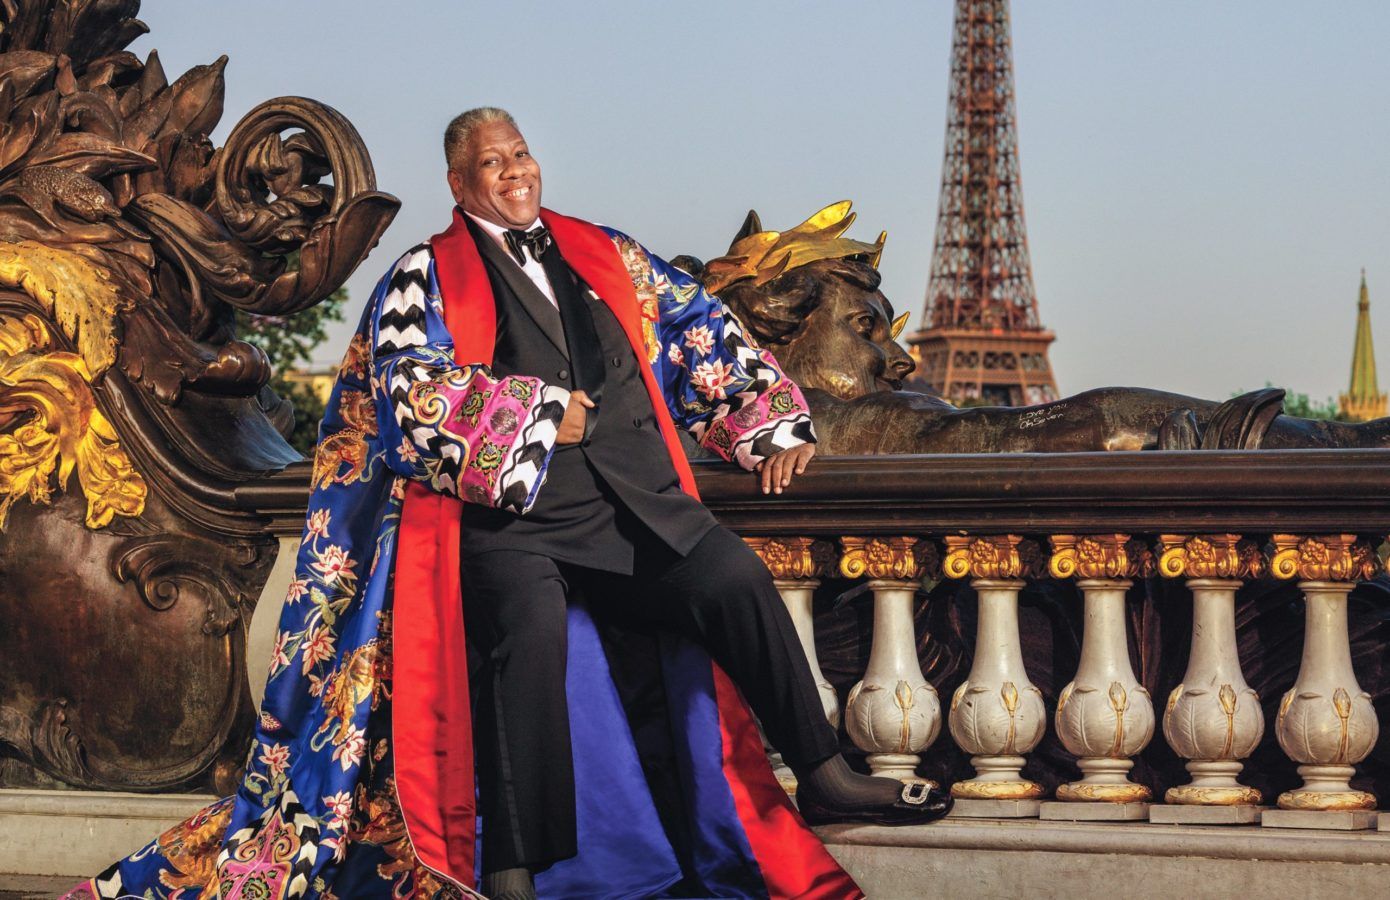 The most iconic styles of fashion legend André Leon Talley